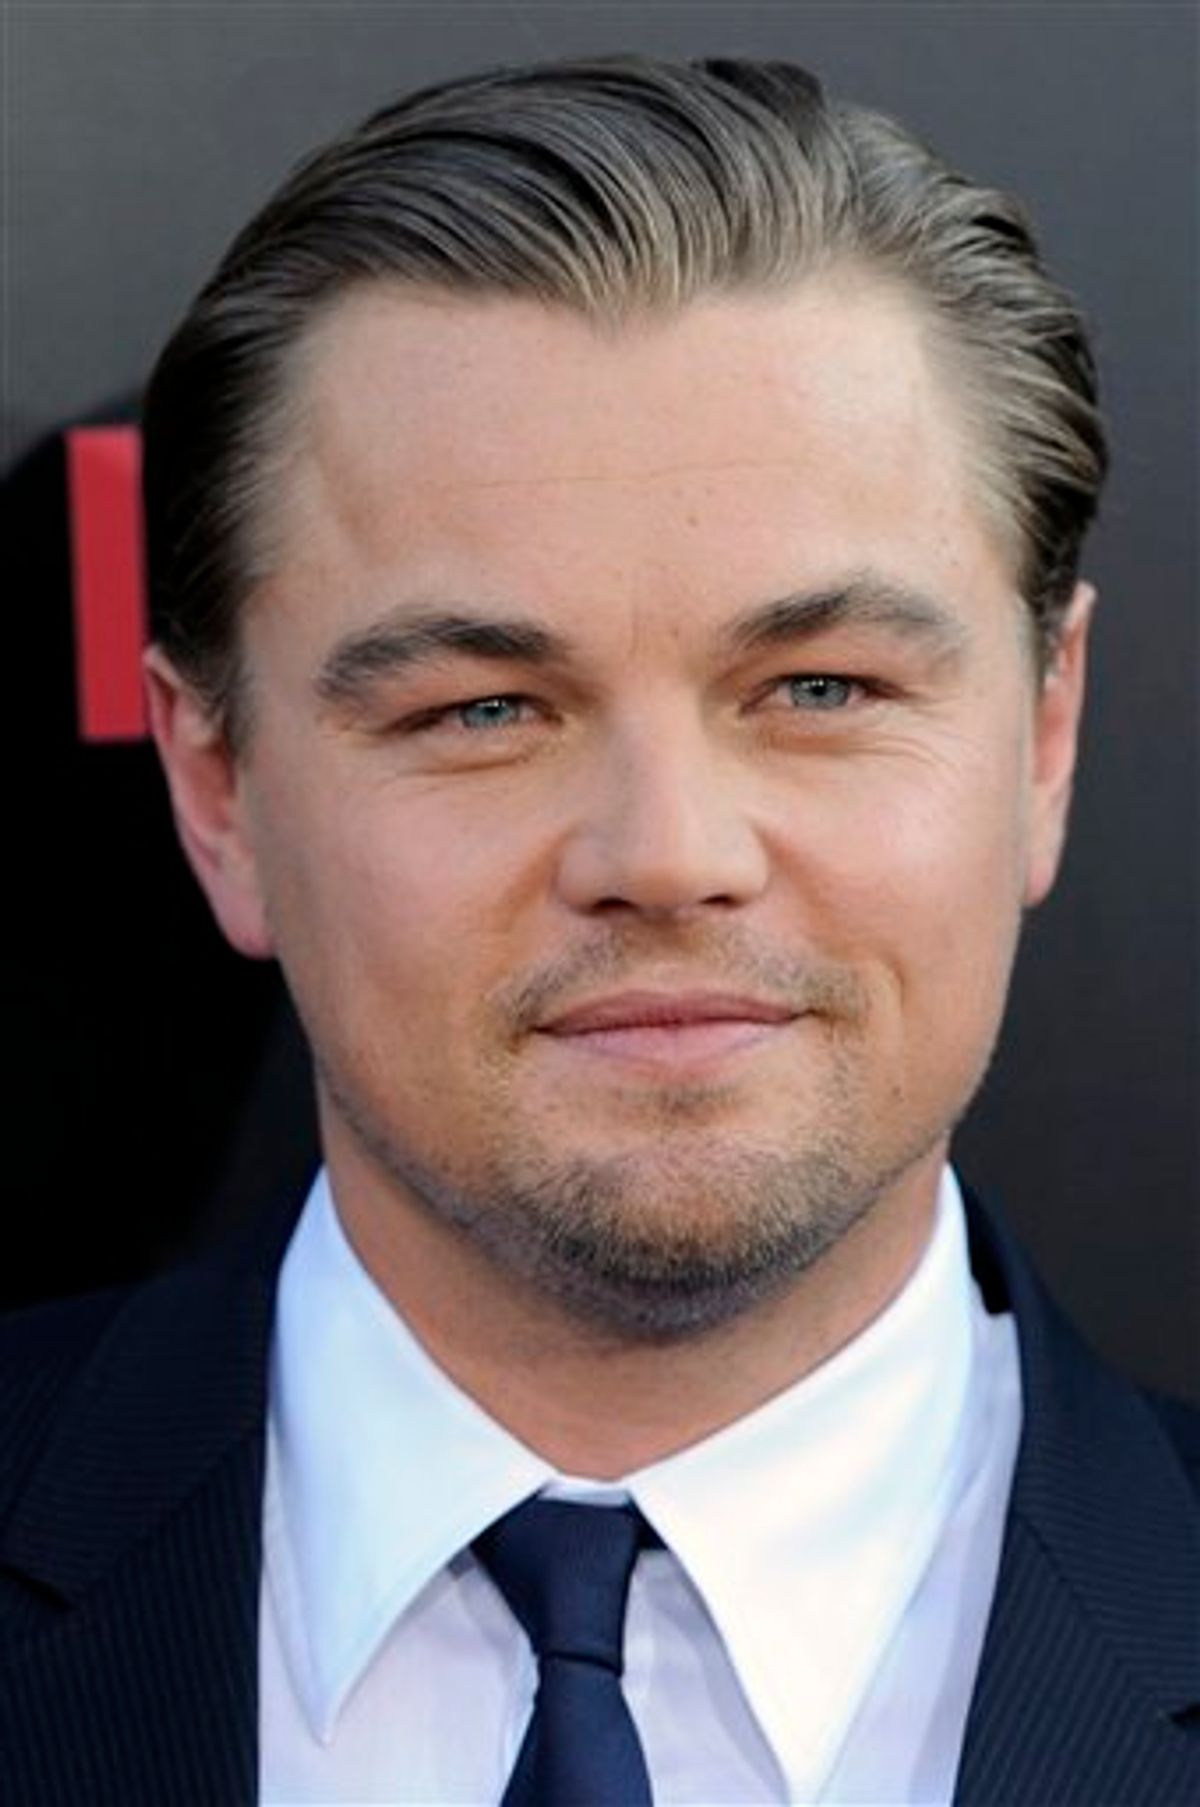 FILE - In this July 13, 2010 file photo, Leonardo DiCaprio poses at the premiere of the film "Inception" in Los Angeles. (AP Photo/Chris Pizzello, file)  (AP)